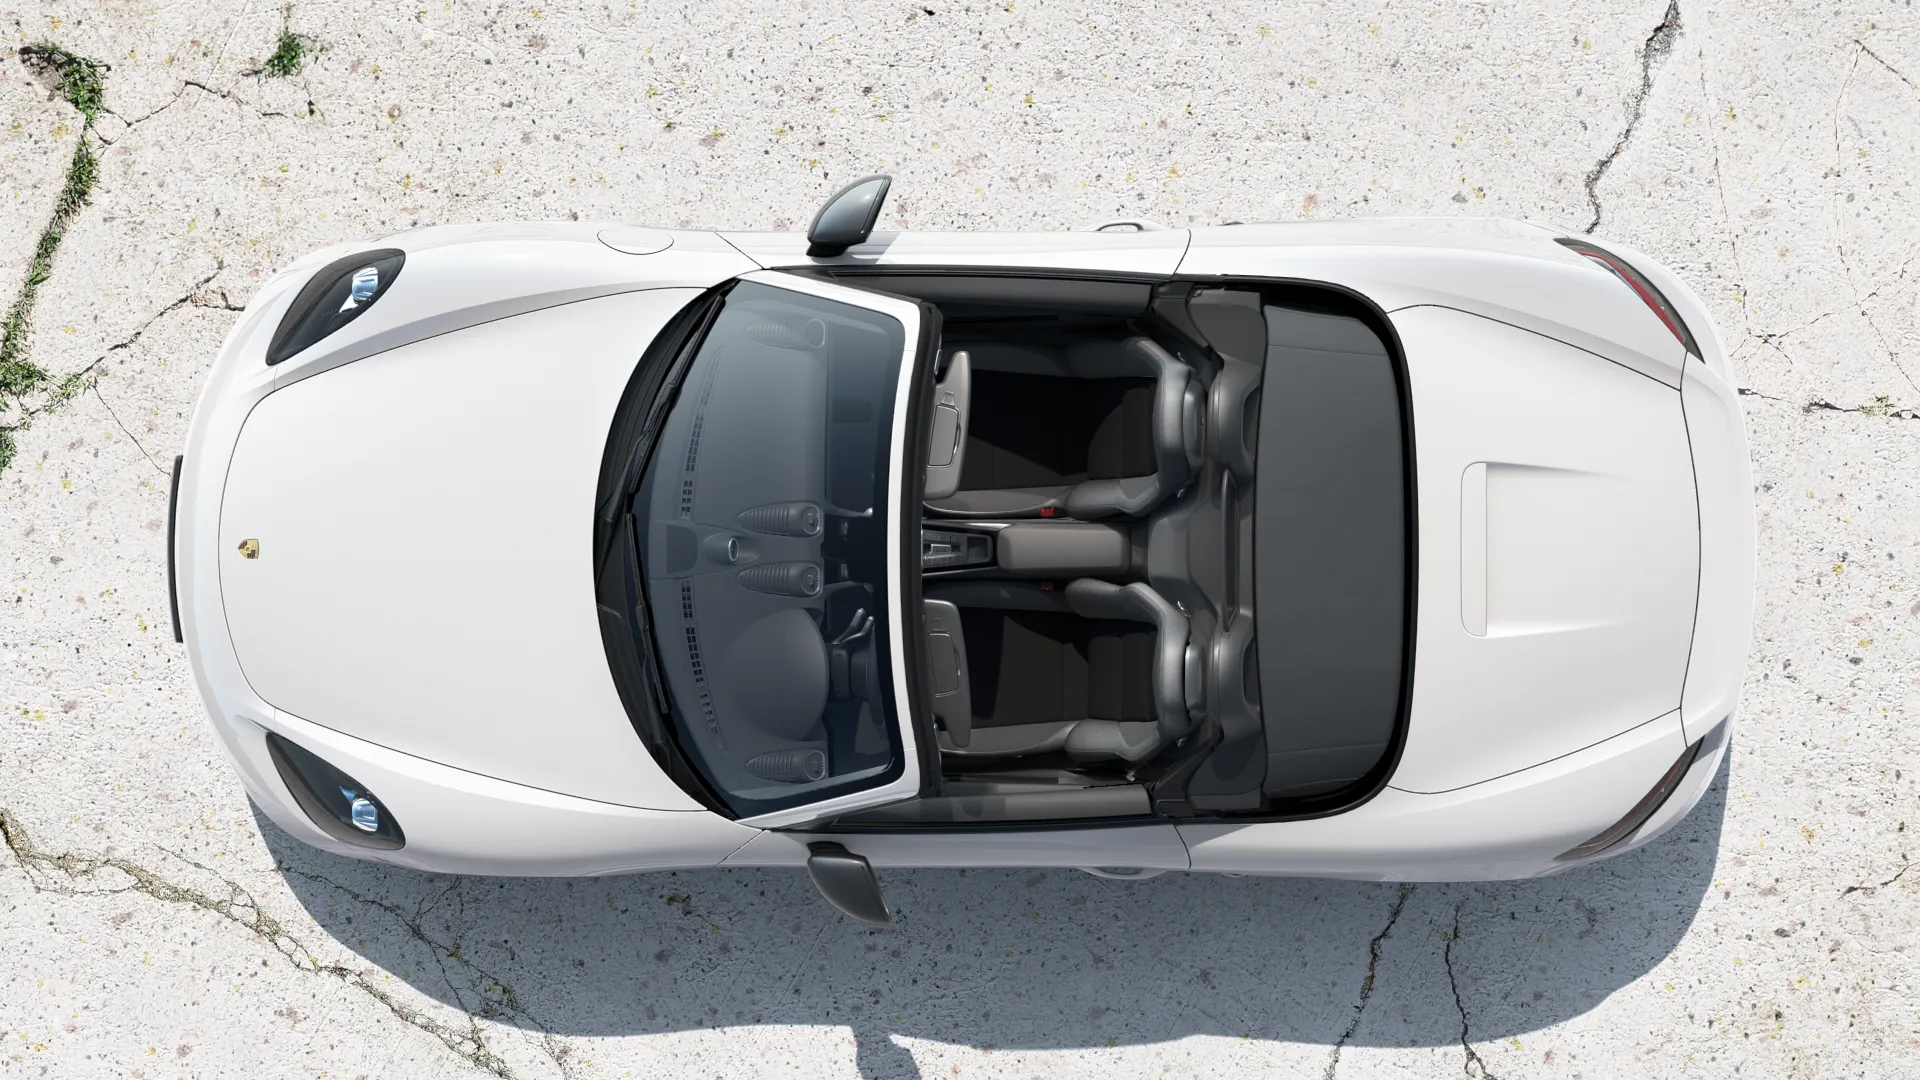 Exterior view of 718 Boxster T